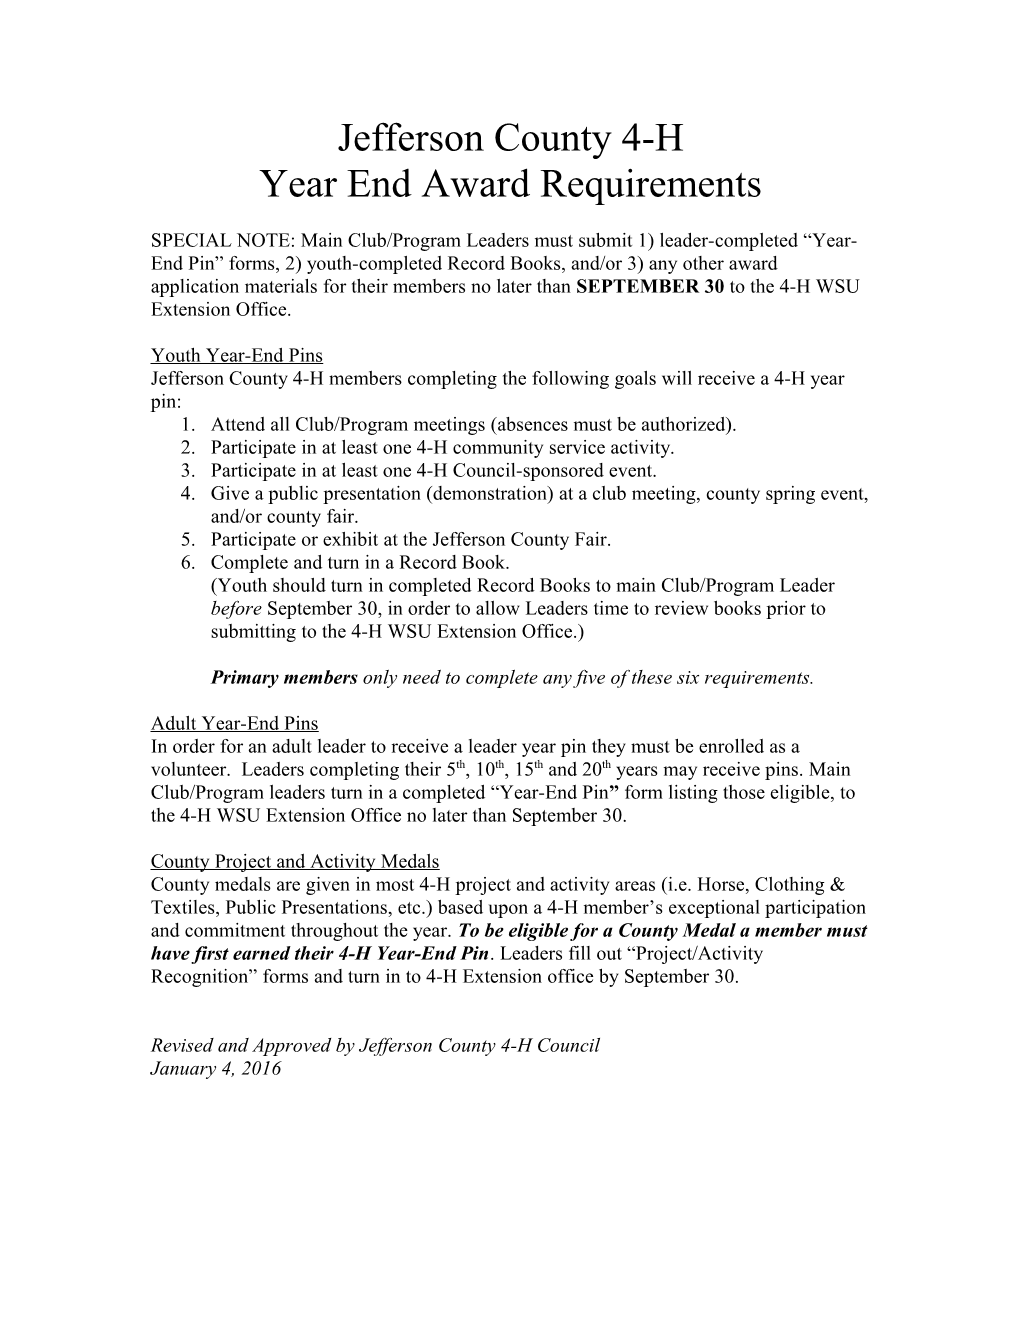 Year End Award Requirements